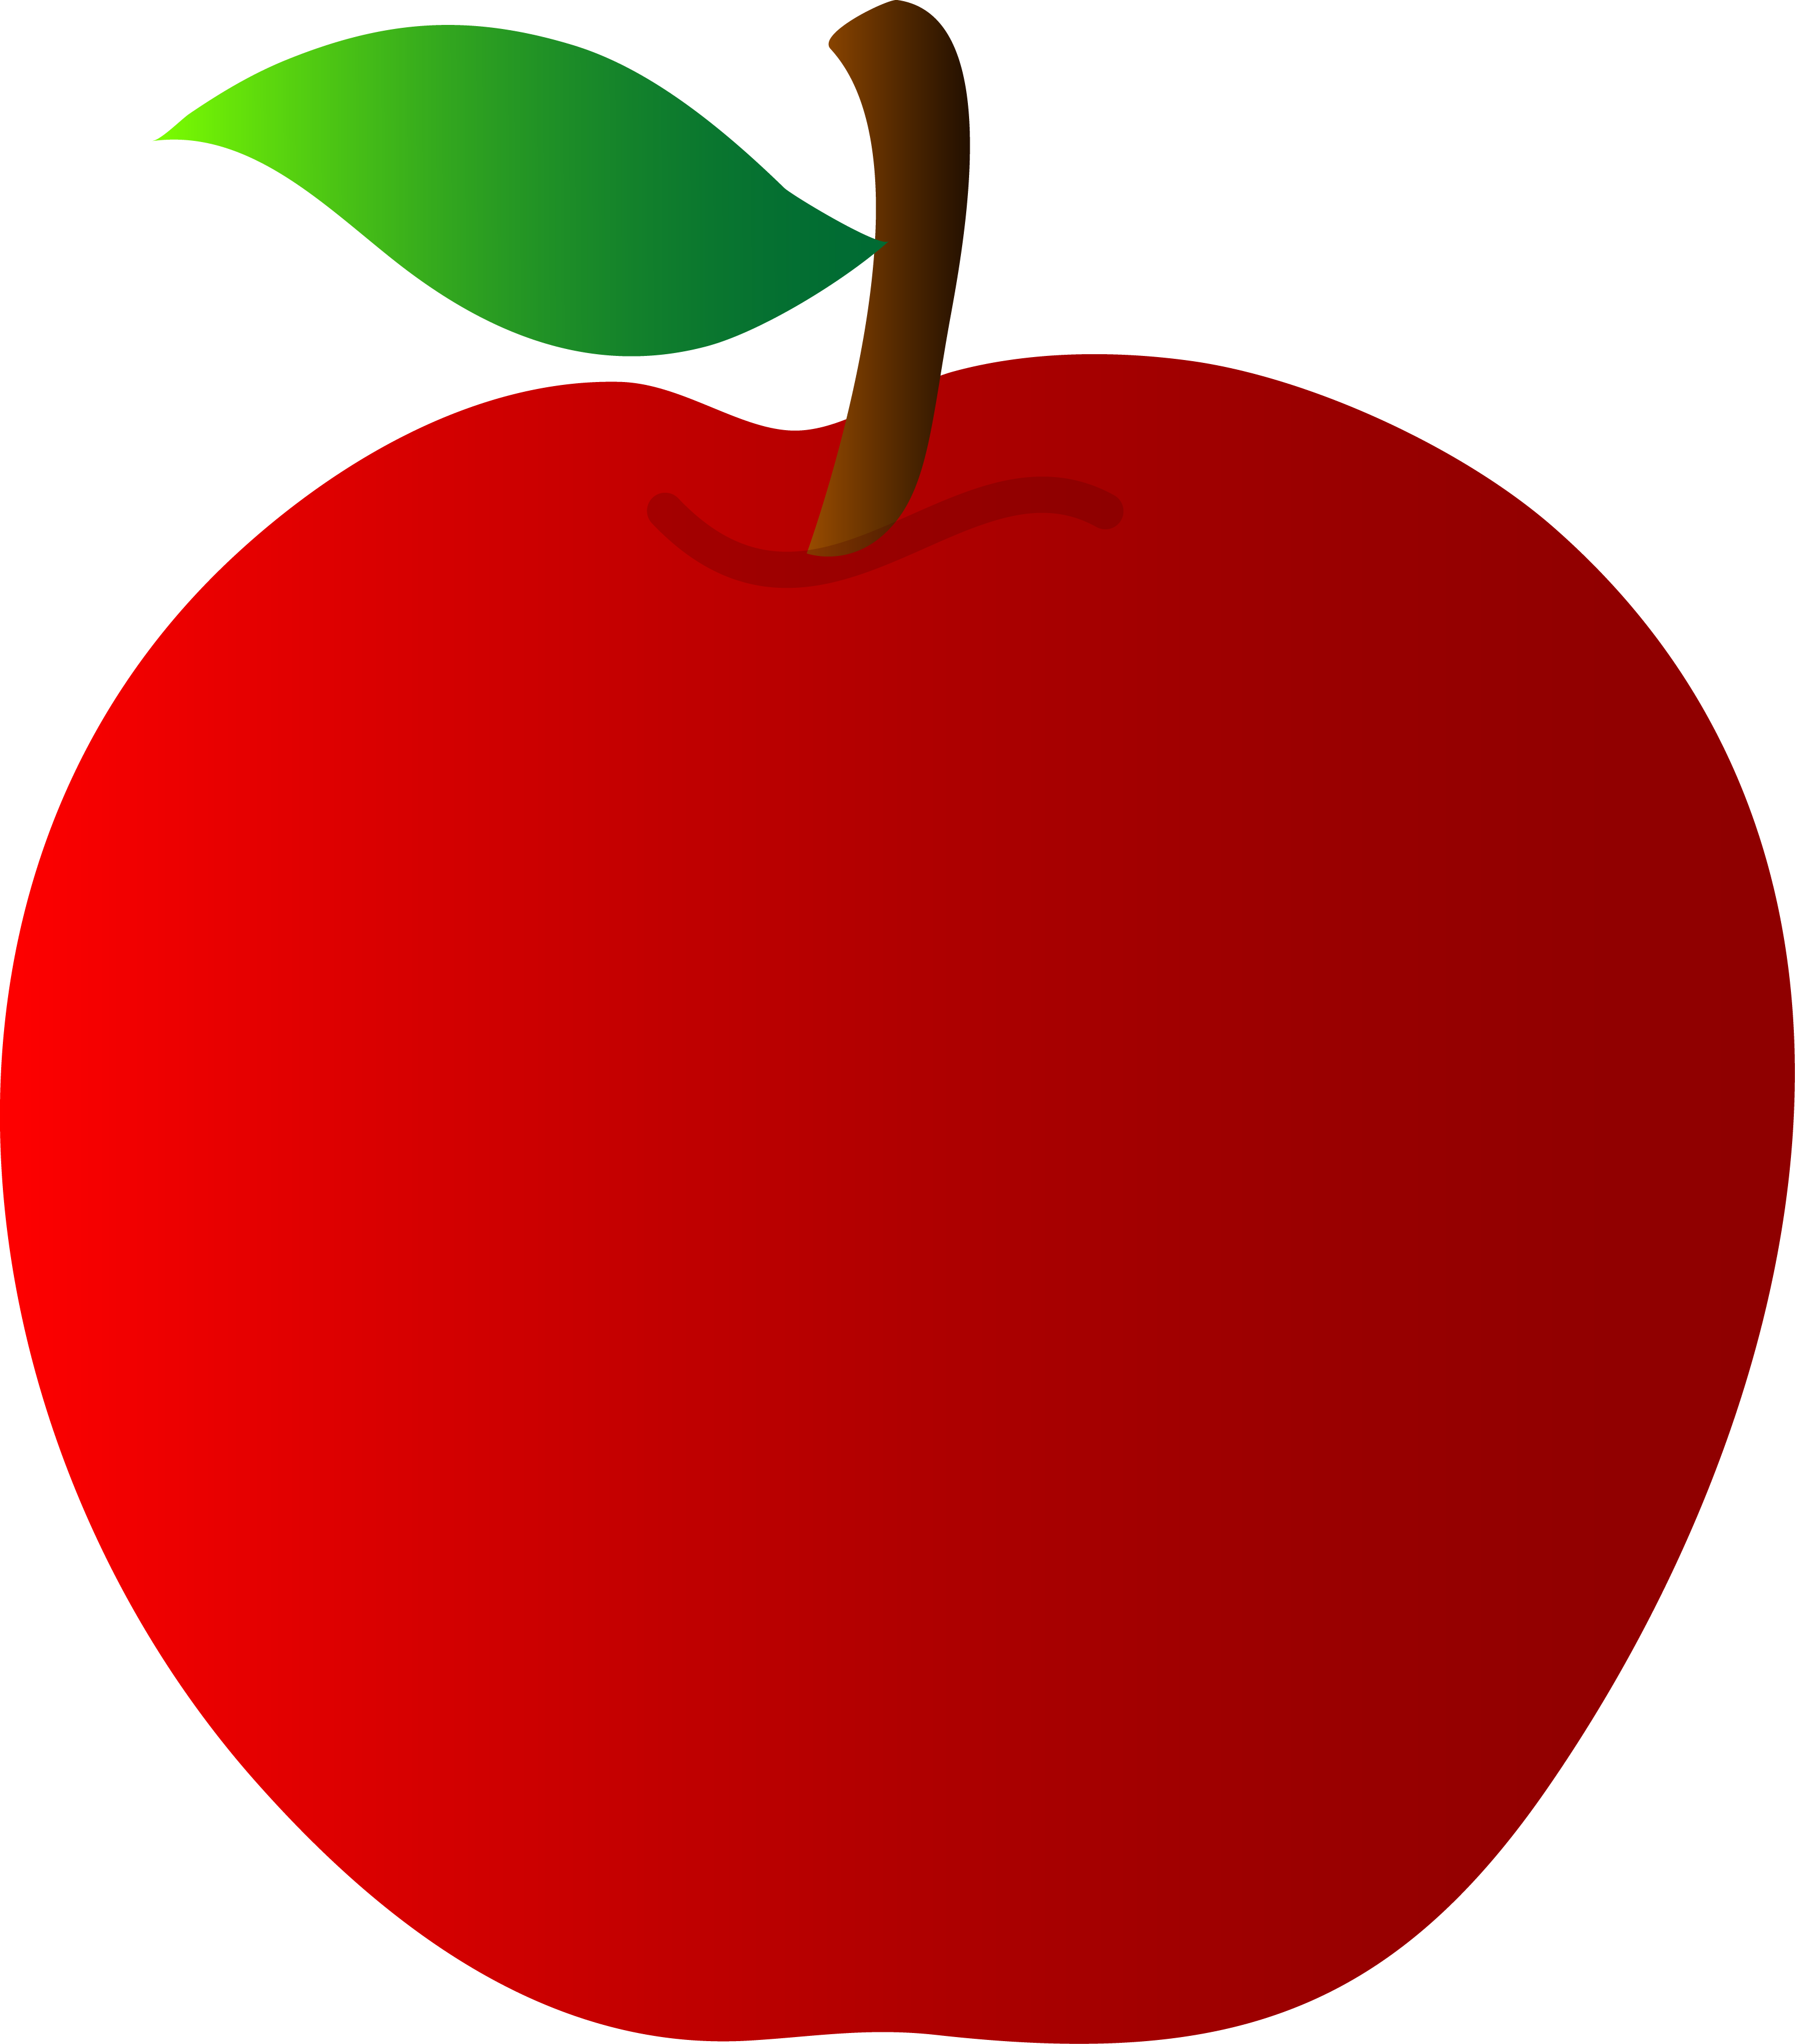 Sweet red apple clipart